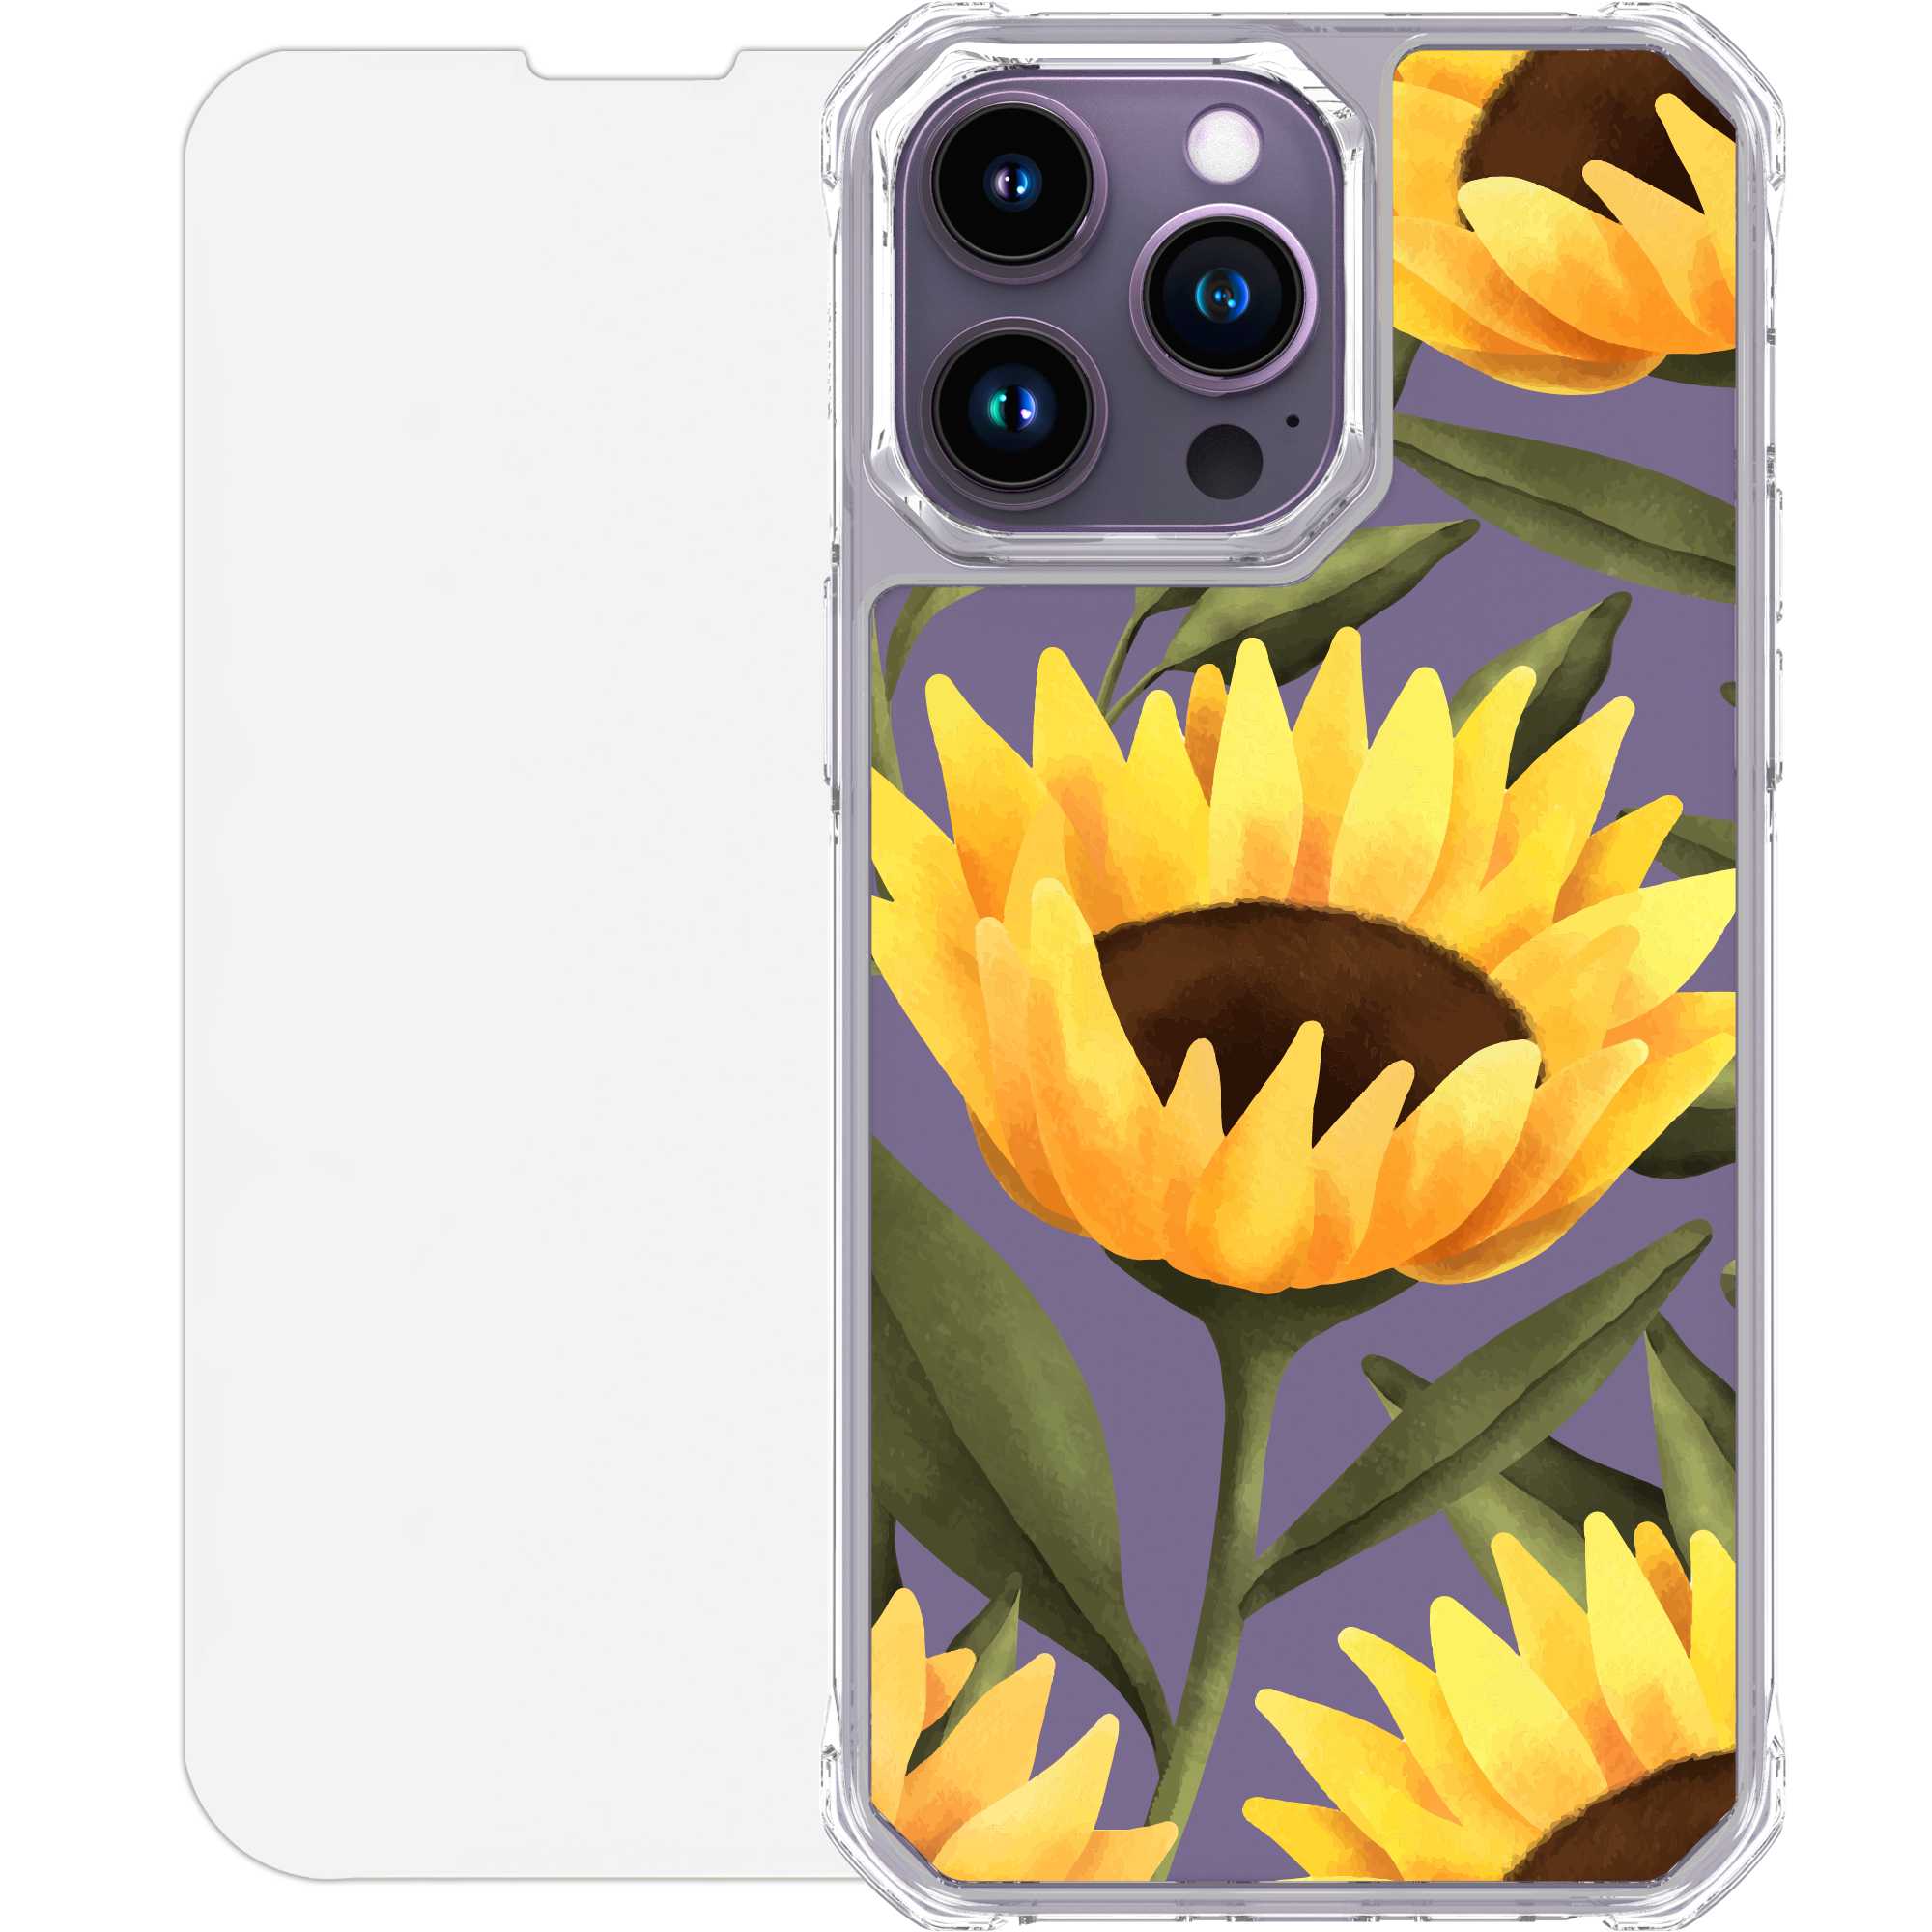 Scooch CrystalCase for iPhone 14 Pro Max BloomingSunflowers Scooch CrystalCase